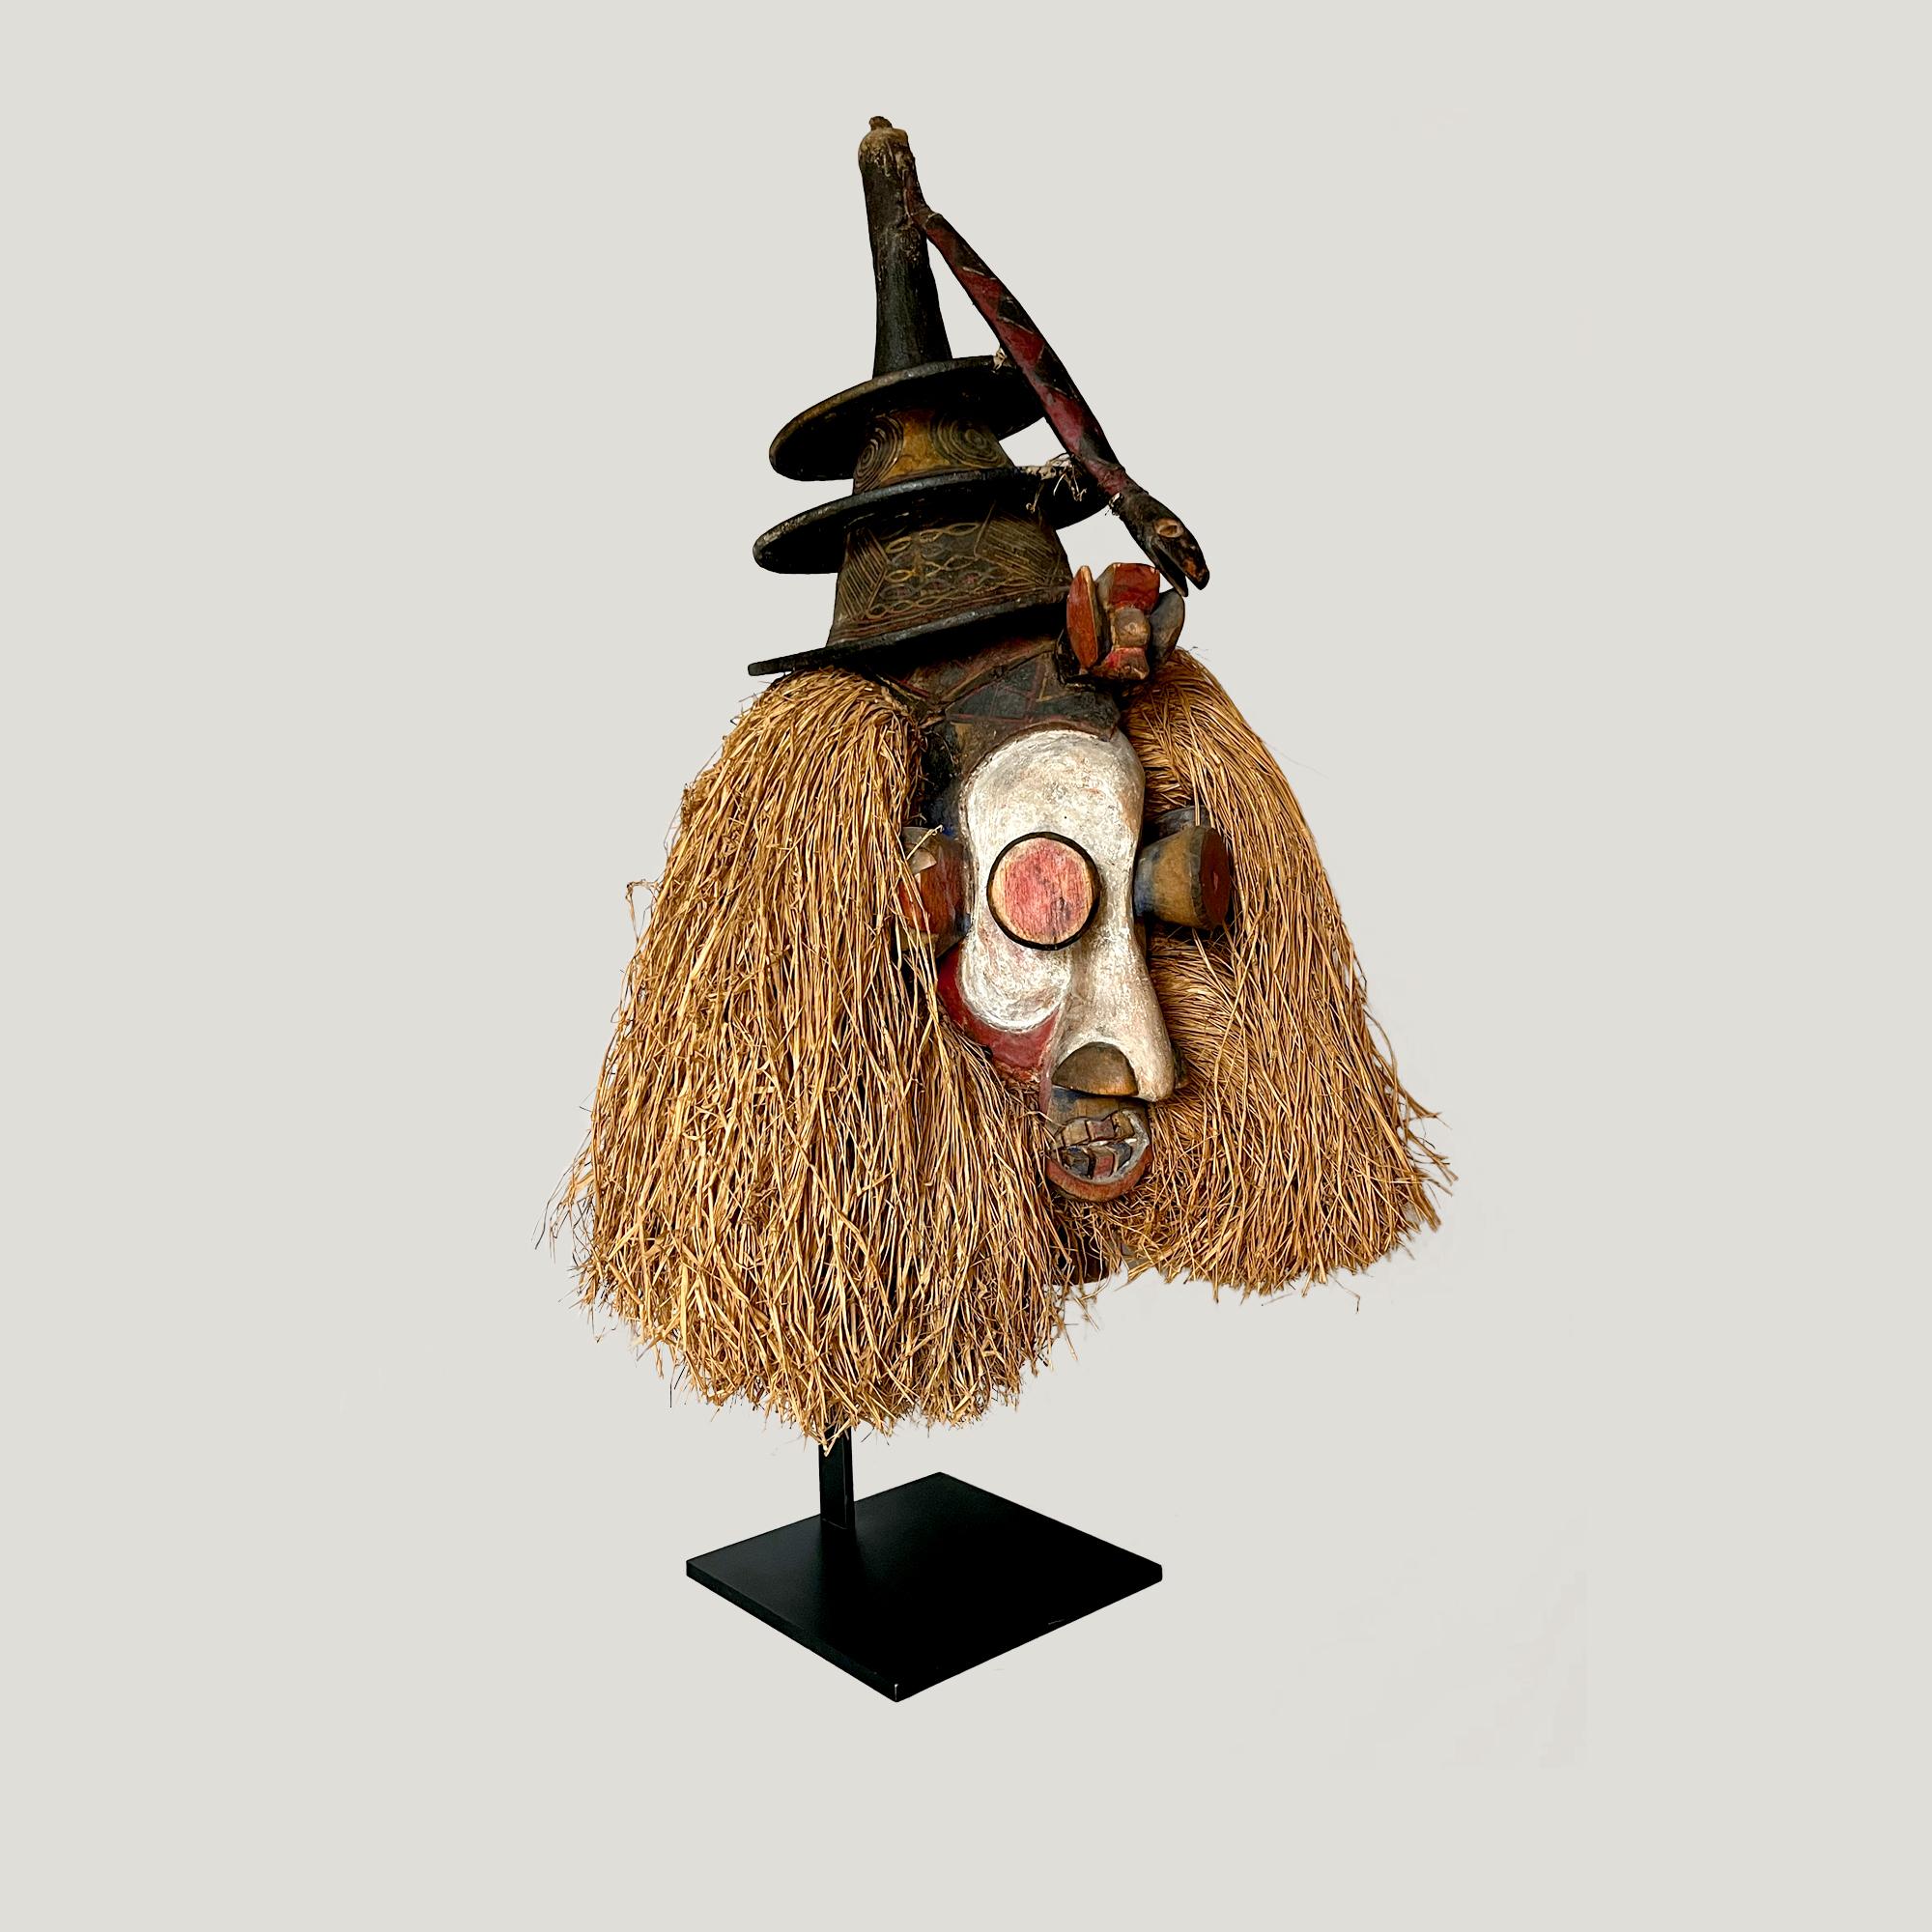 Kholuka Yaka Mask, DR Congo.
Wood, basketry, textile, raffia.

Typical African mask of the Yaka in the south of the Democratic Republic of Congo. The Kholuka Yaka Mask was used in the context of boys' initiation rites. The mask allowed them to be